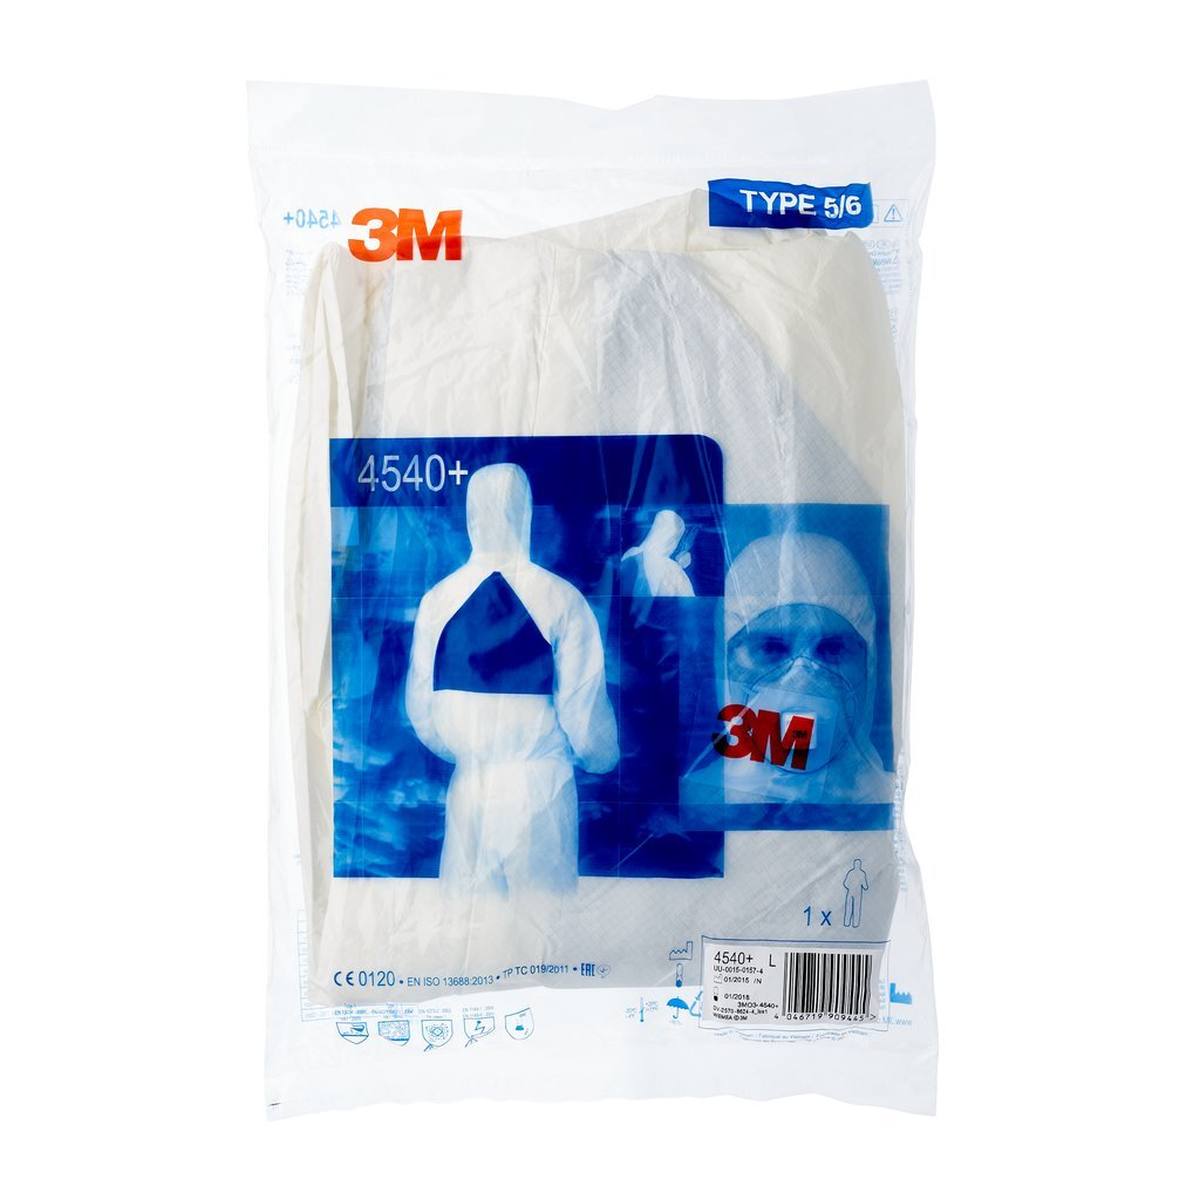 3M 4540 coverall, white blue, type 5/6, size XXL, robust, lint-free, reinforced seams, SMMMS material, breathable, detachable zipper, knitted cuffs